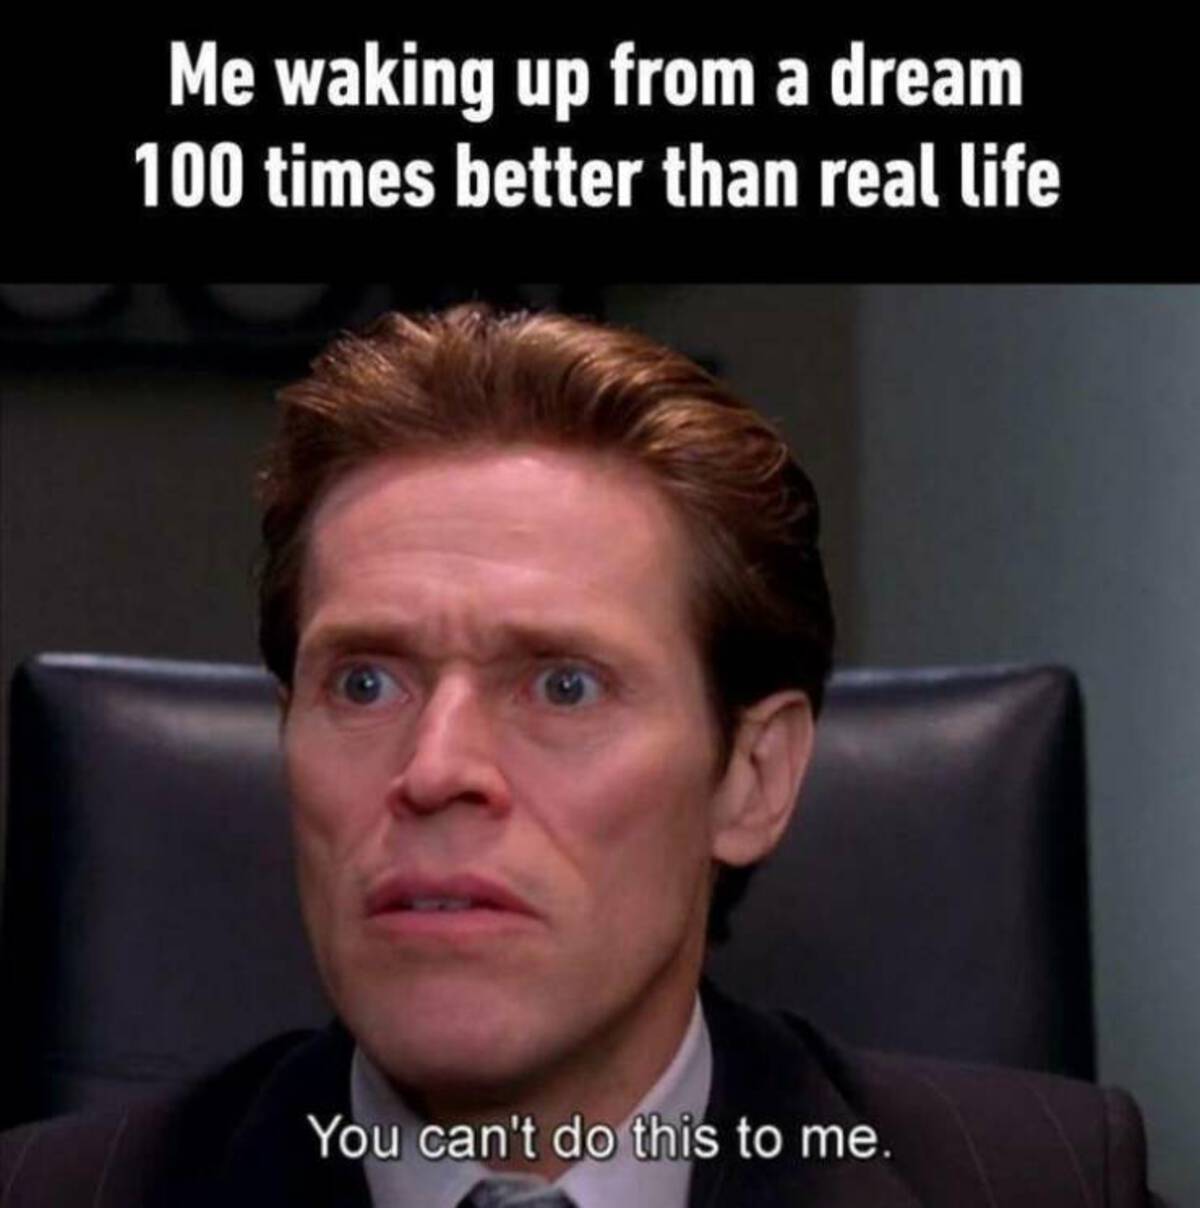 character ai memes - Me waking up from a dream 100 times better than real life You can't do this to me.